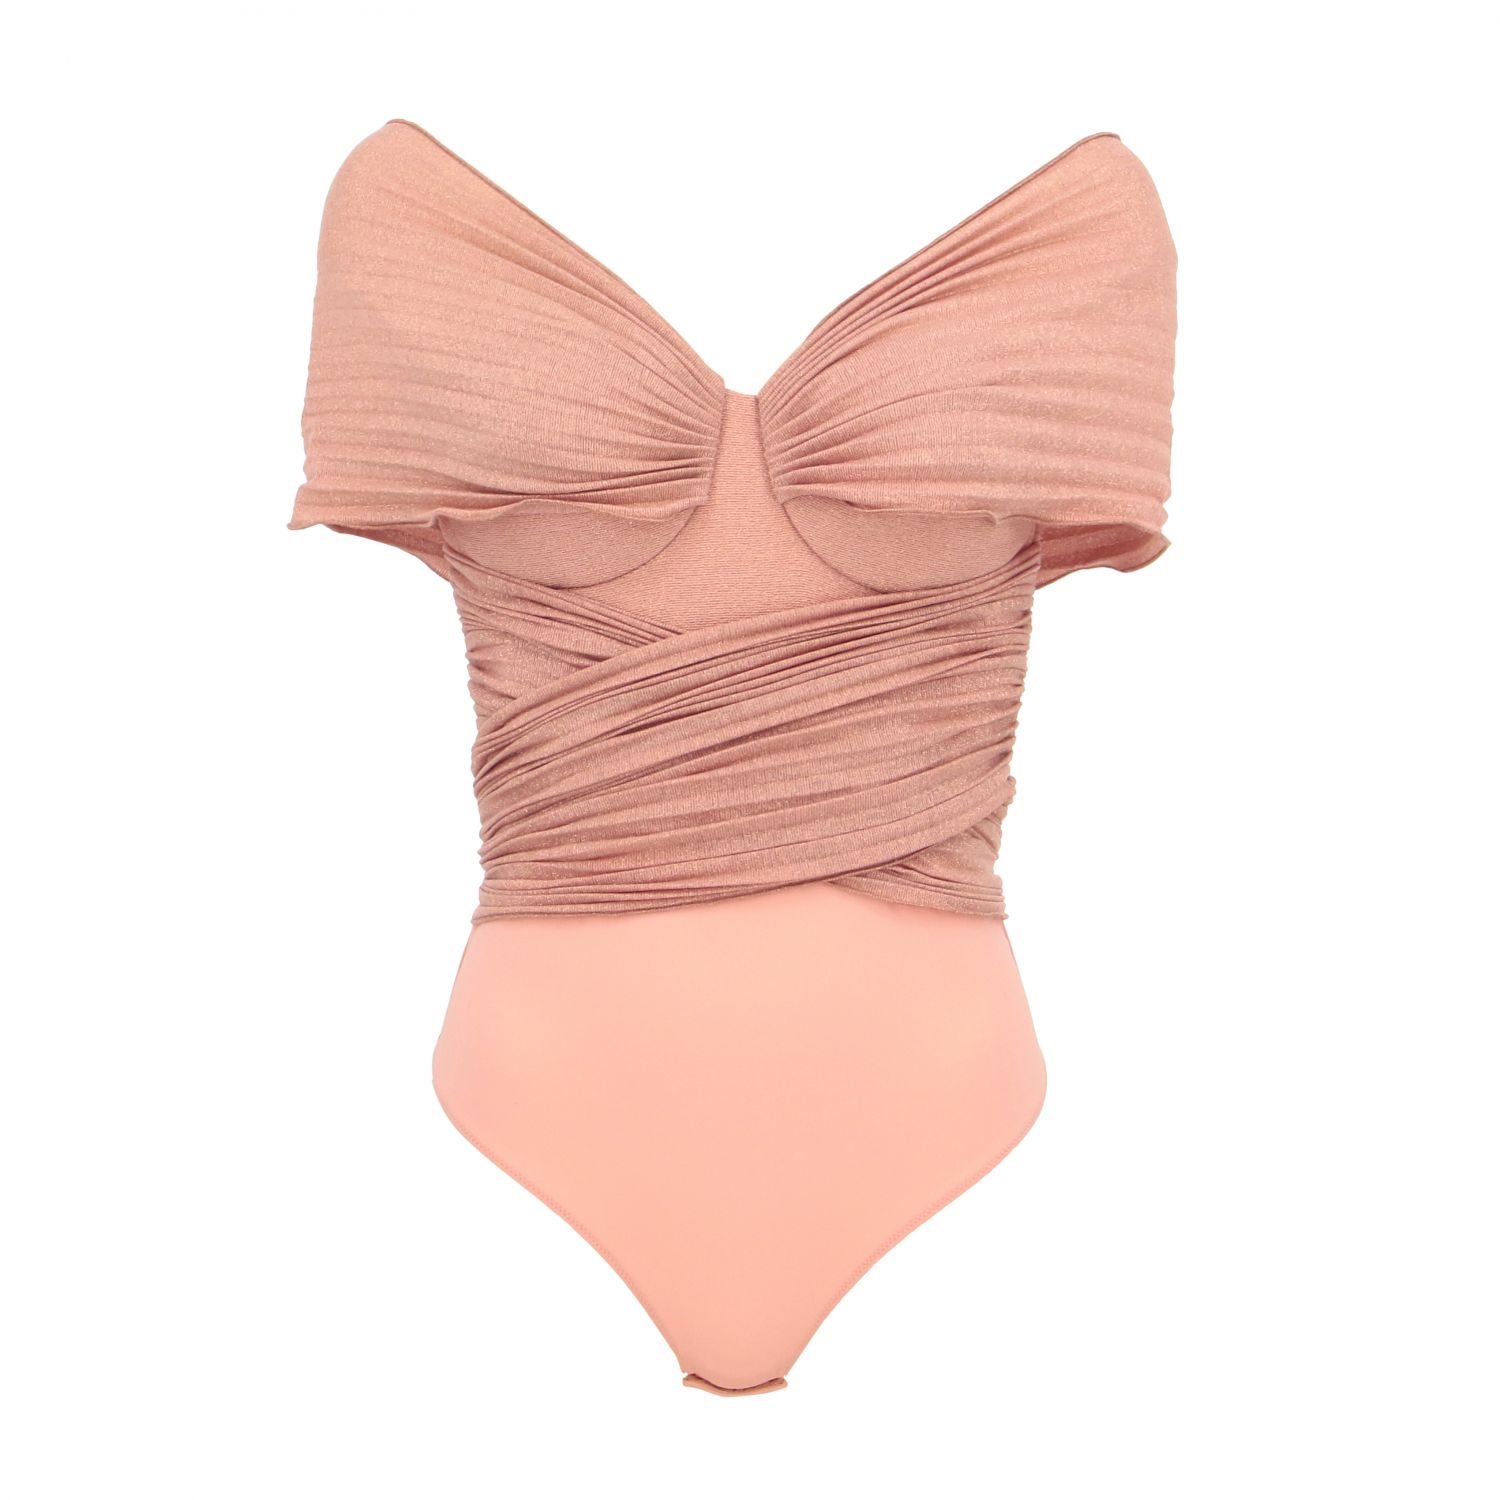 Elisabetta Franchi Outlet: heart body in lurex fabric - Pink | Top ...